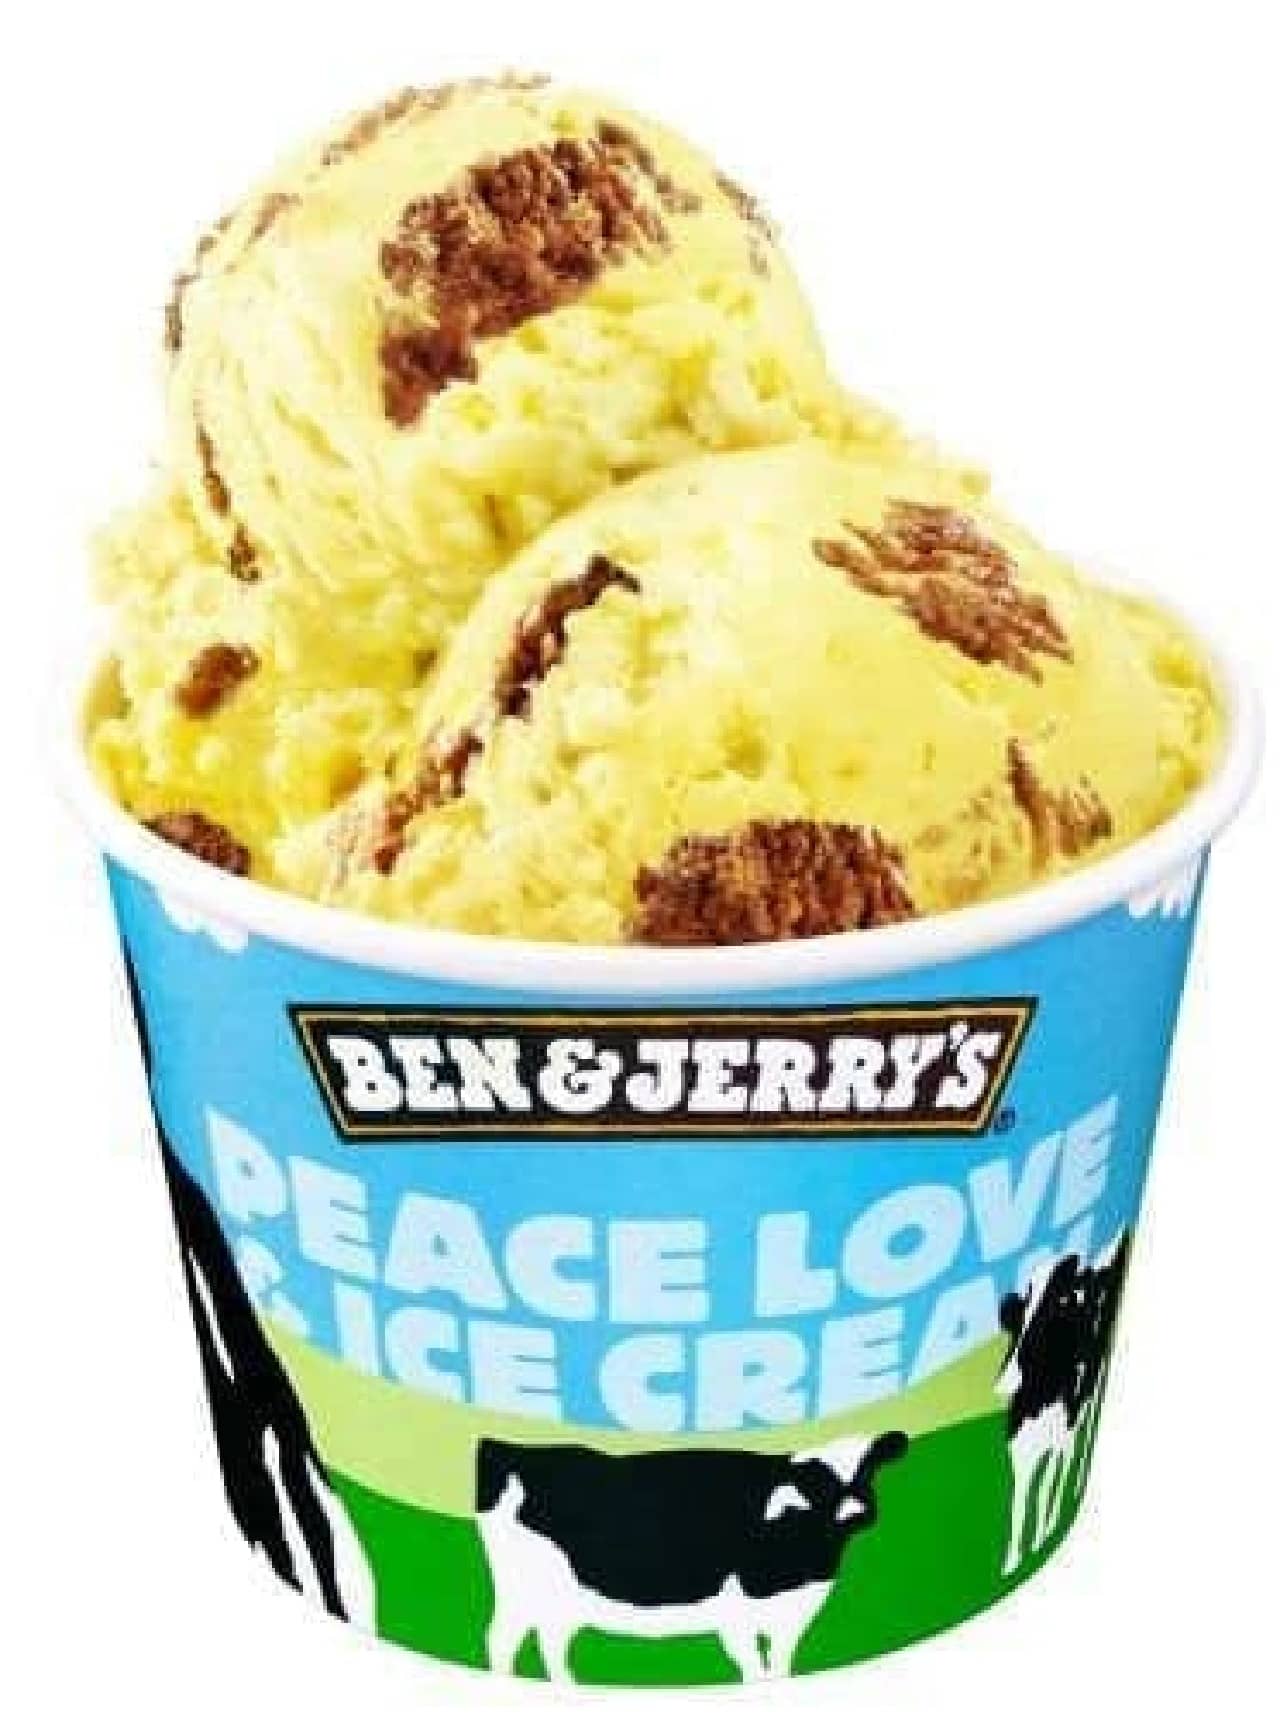 BEN & JERRY'S has released a new Japanese-only flavor "Pumpkin Treat"!